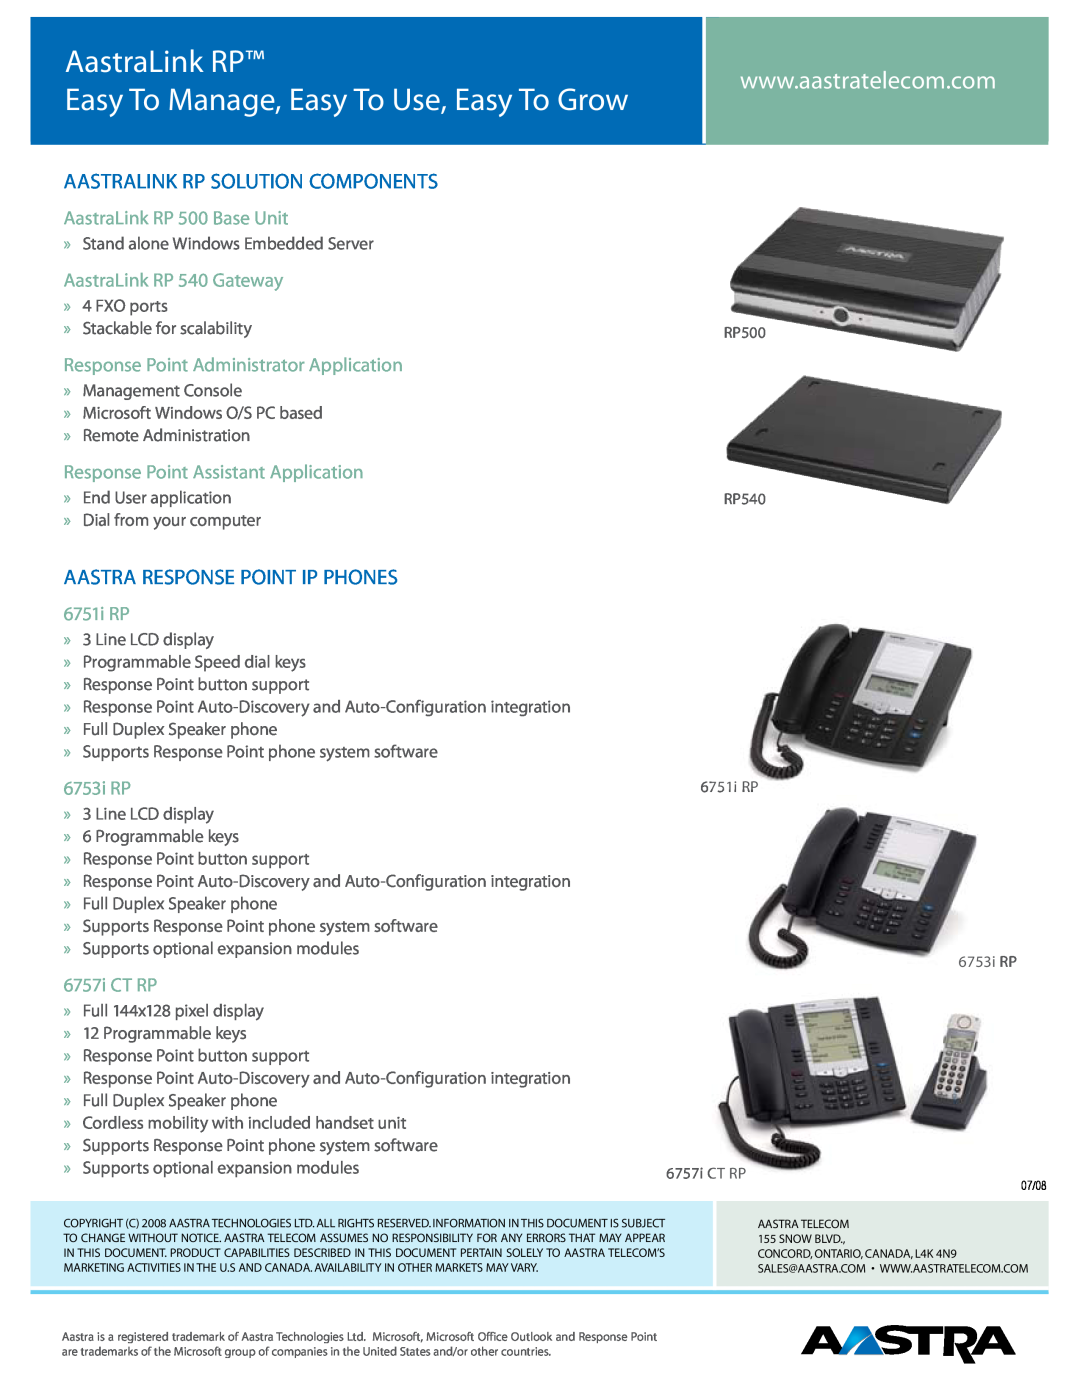 Aastra Telecom IP-PBX AastraLink RP Easy To Manage, Easy To Use, Easy To Grow, AastraLink RP Solution Components, 6751i RP 